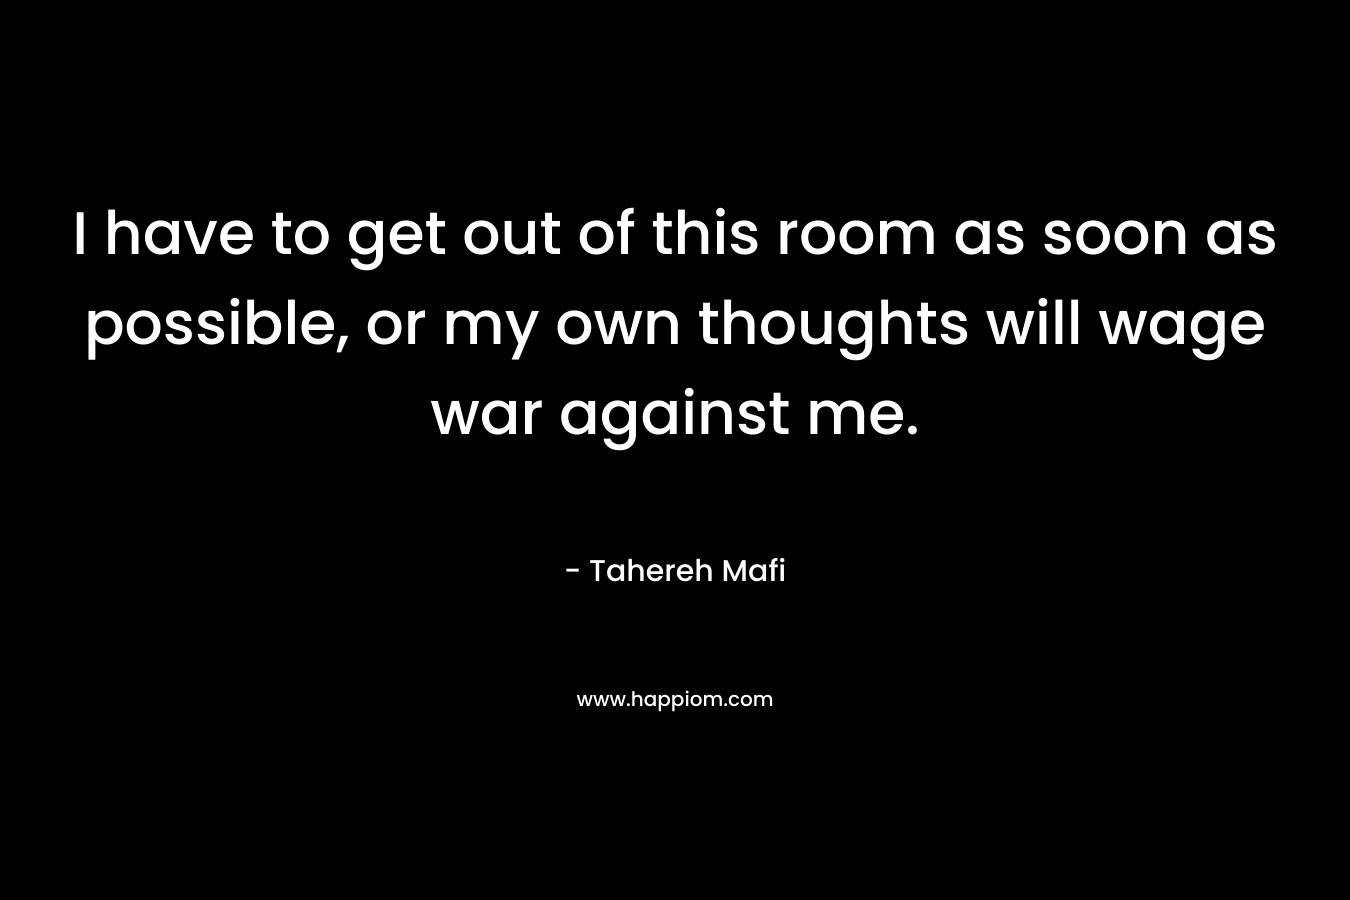 I have to get out of this room as soon as possible, or my own thoughts will wage war against me. – Tahereh Mafi